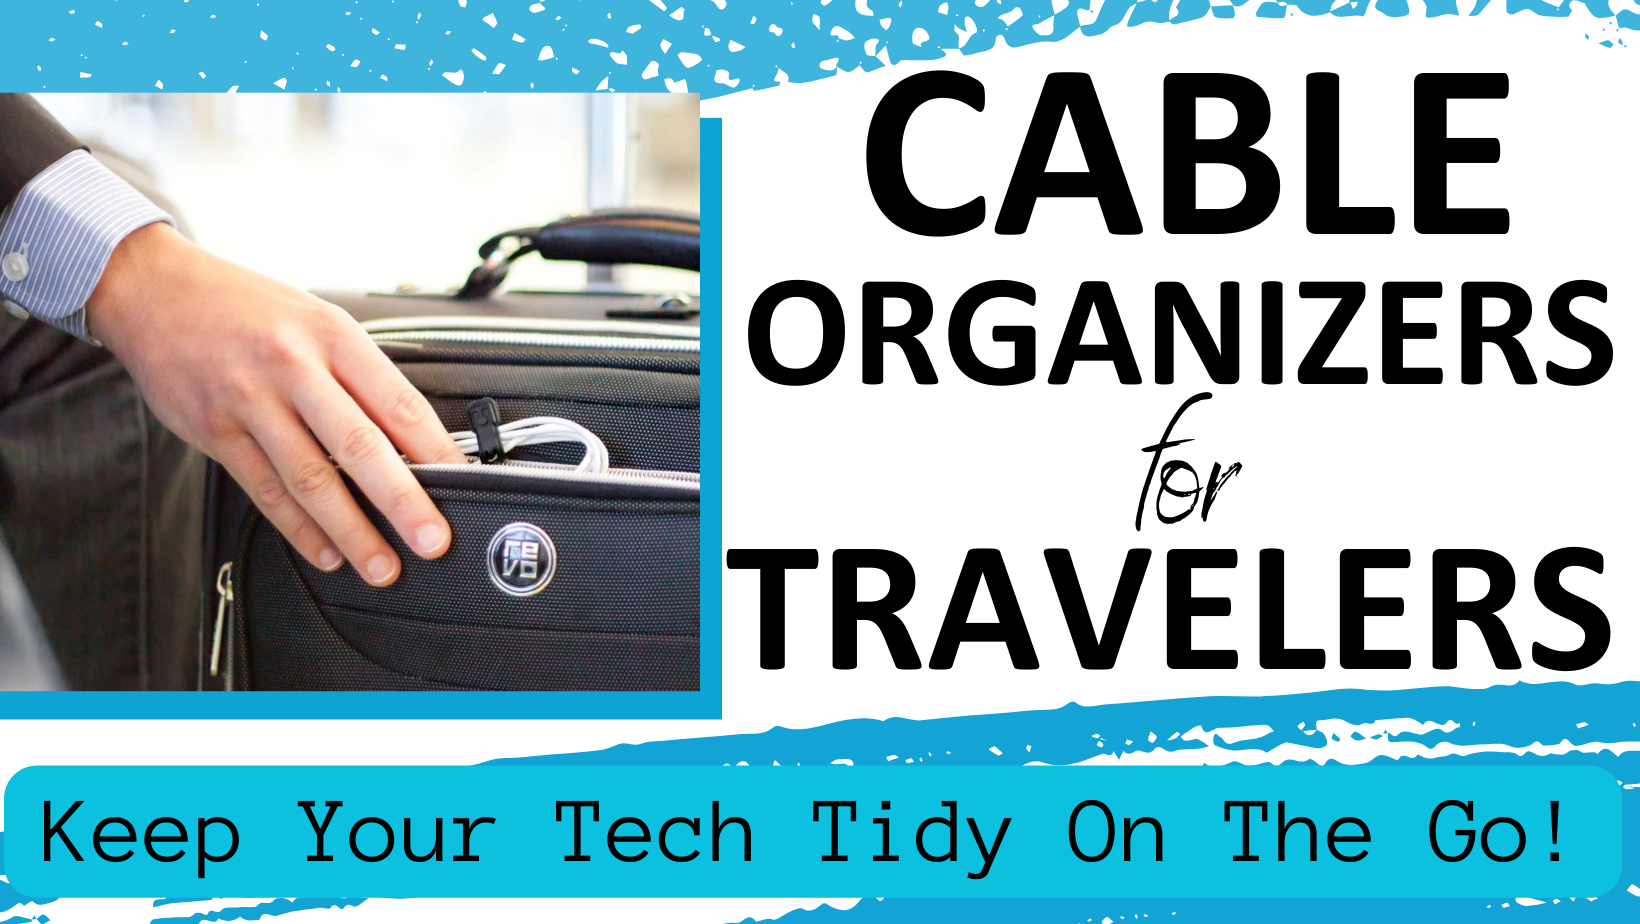 Cable Organizers For Travelers: Keep Your Tech Tidy On The Go!